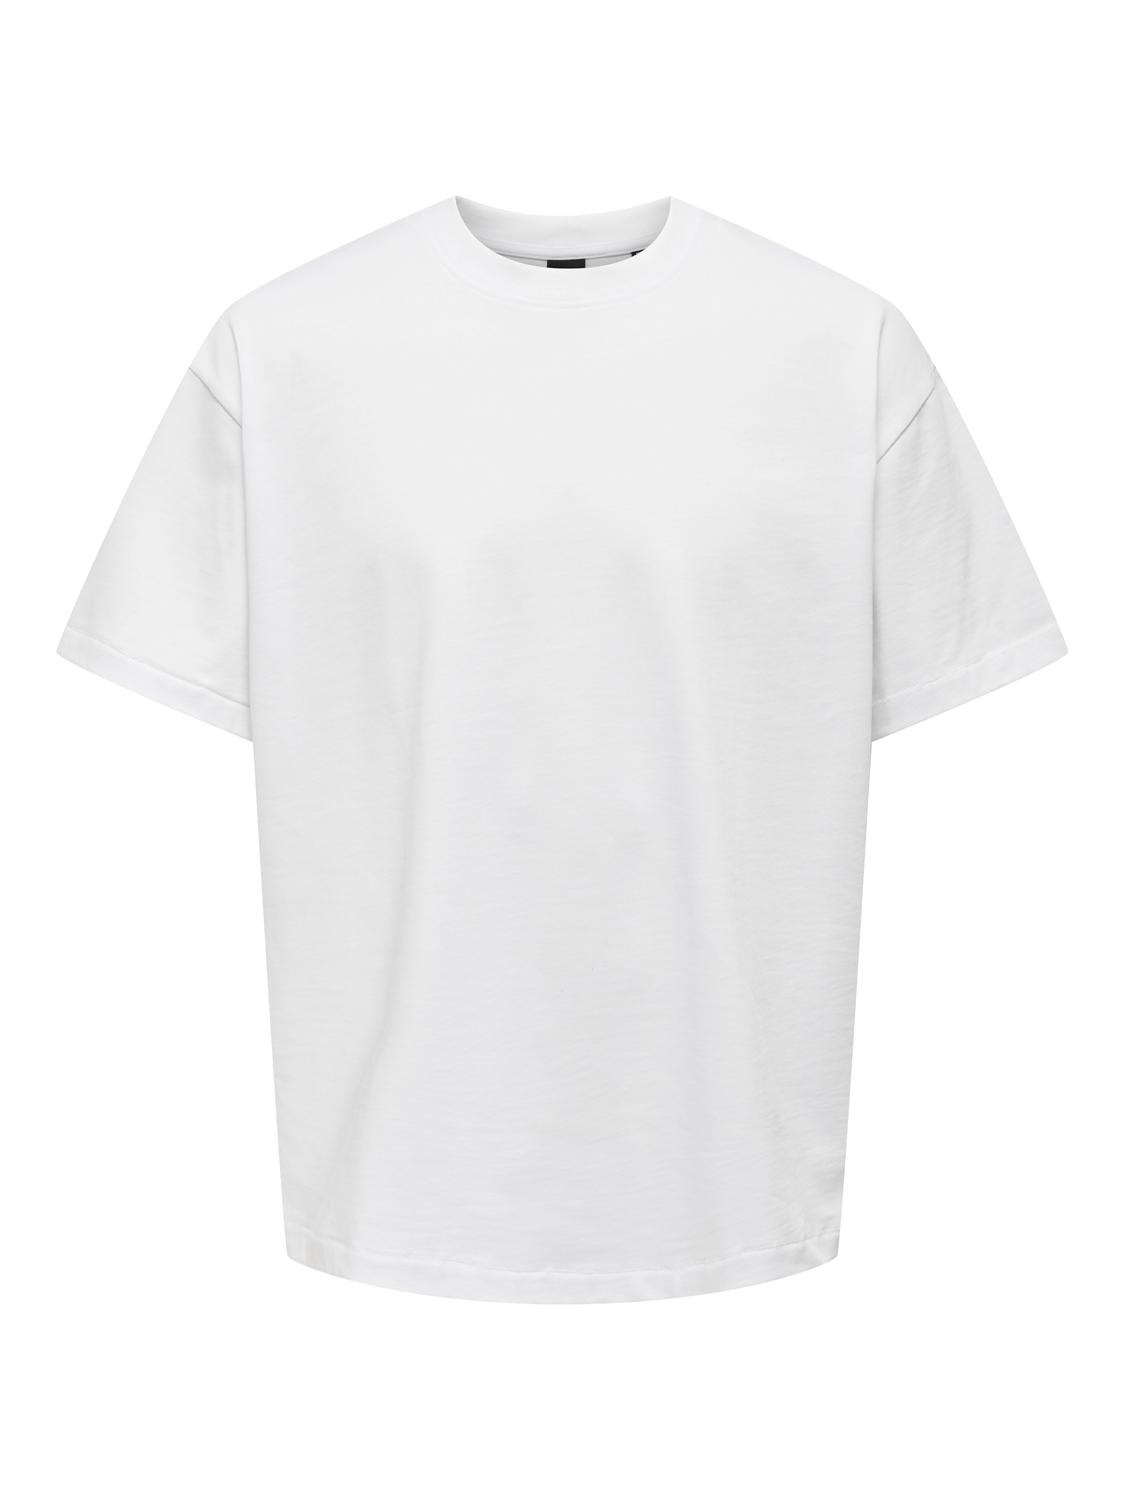 ONLY & SONS O-hals t-shirt  -Bright White - 22027787